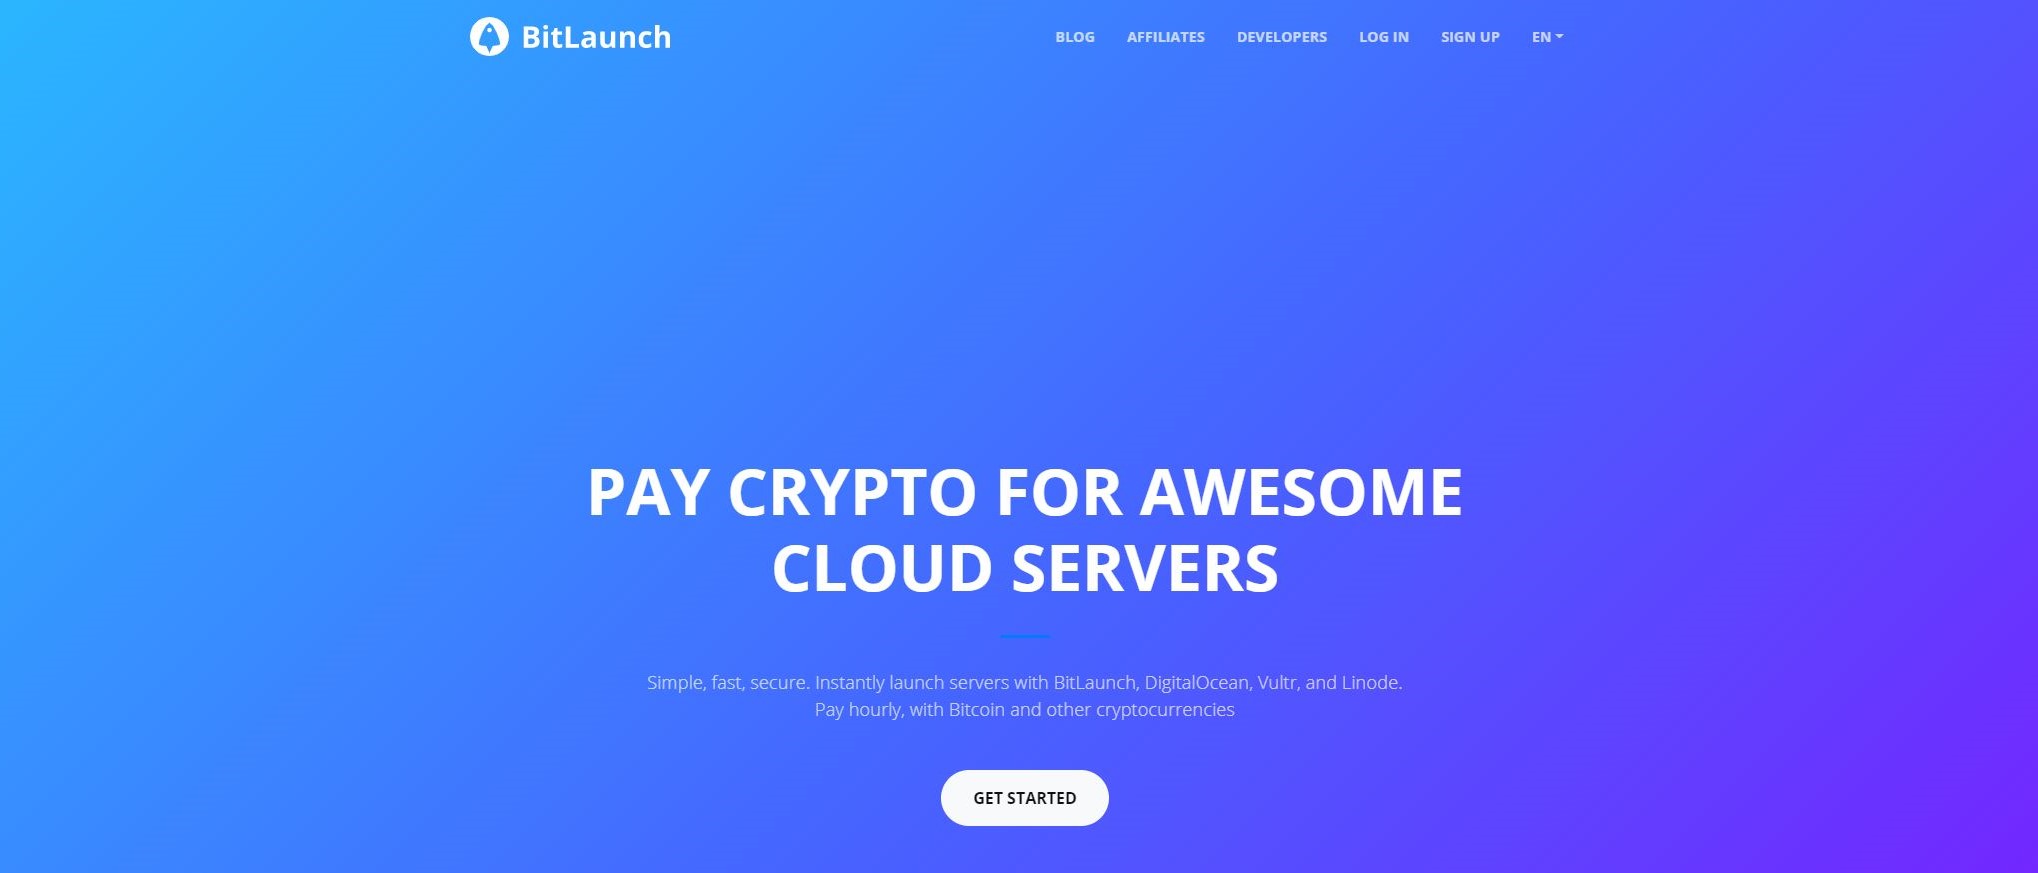 bitcoinhelp.fun now enables cryptocurrency payments for cloud hosting with DigitalOcean and Linode